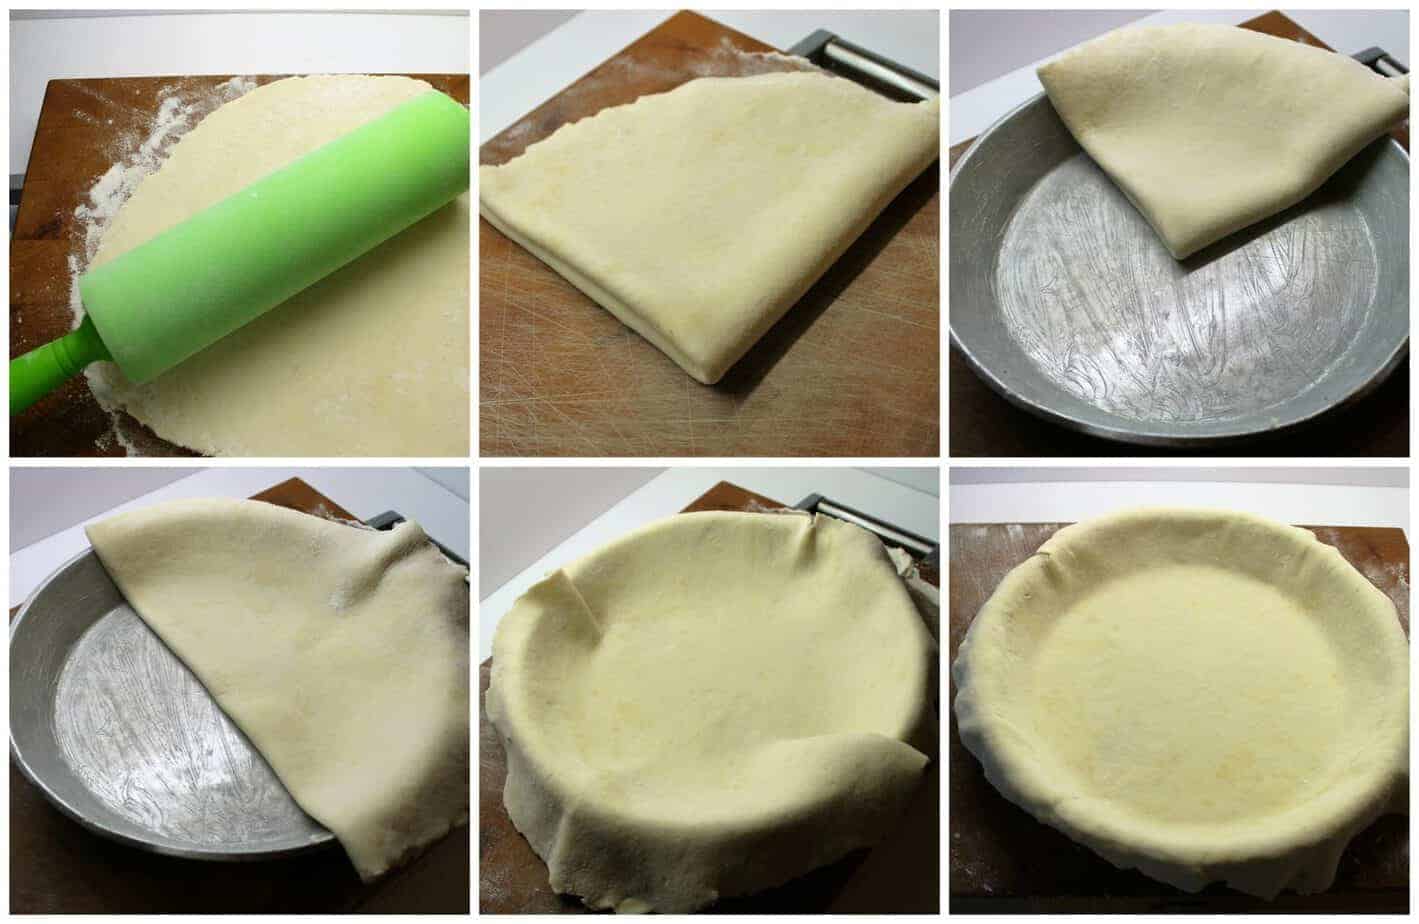  sequence showing how to place pie dough in a pie pan